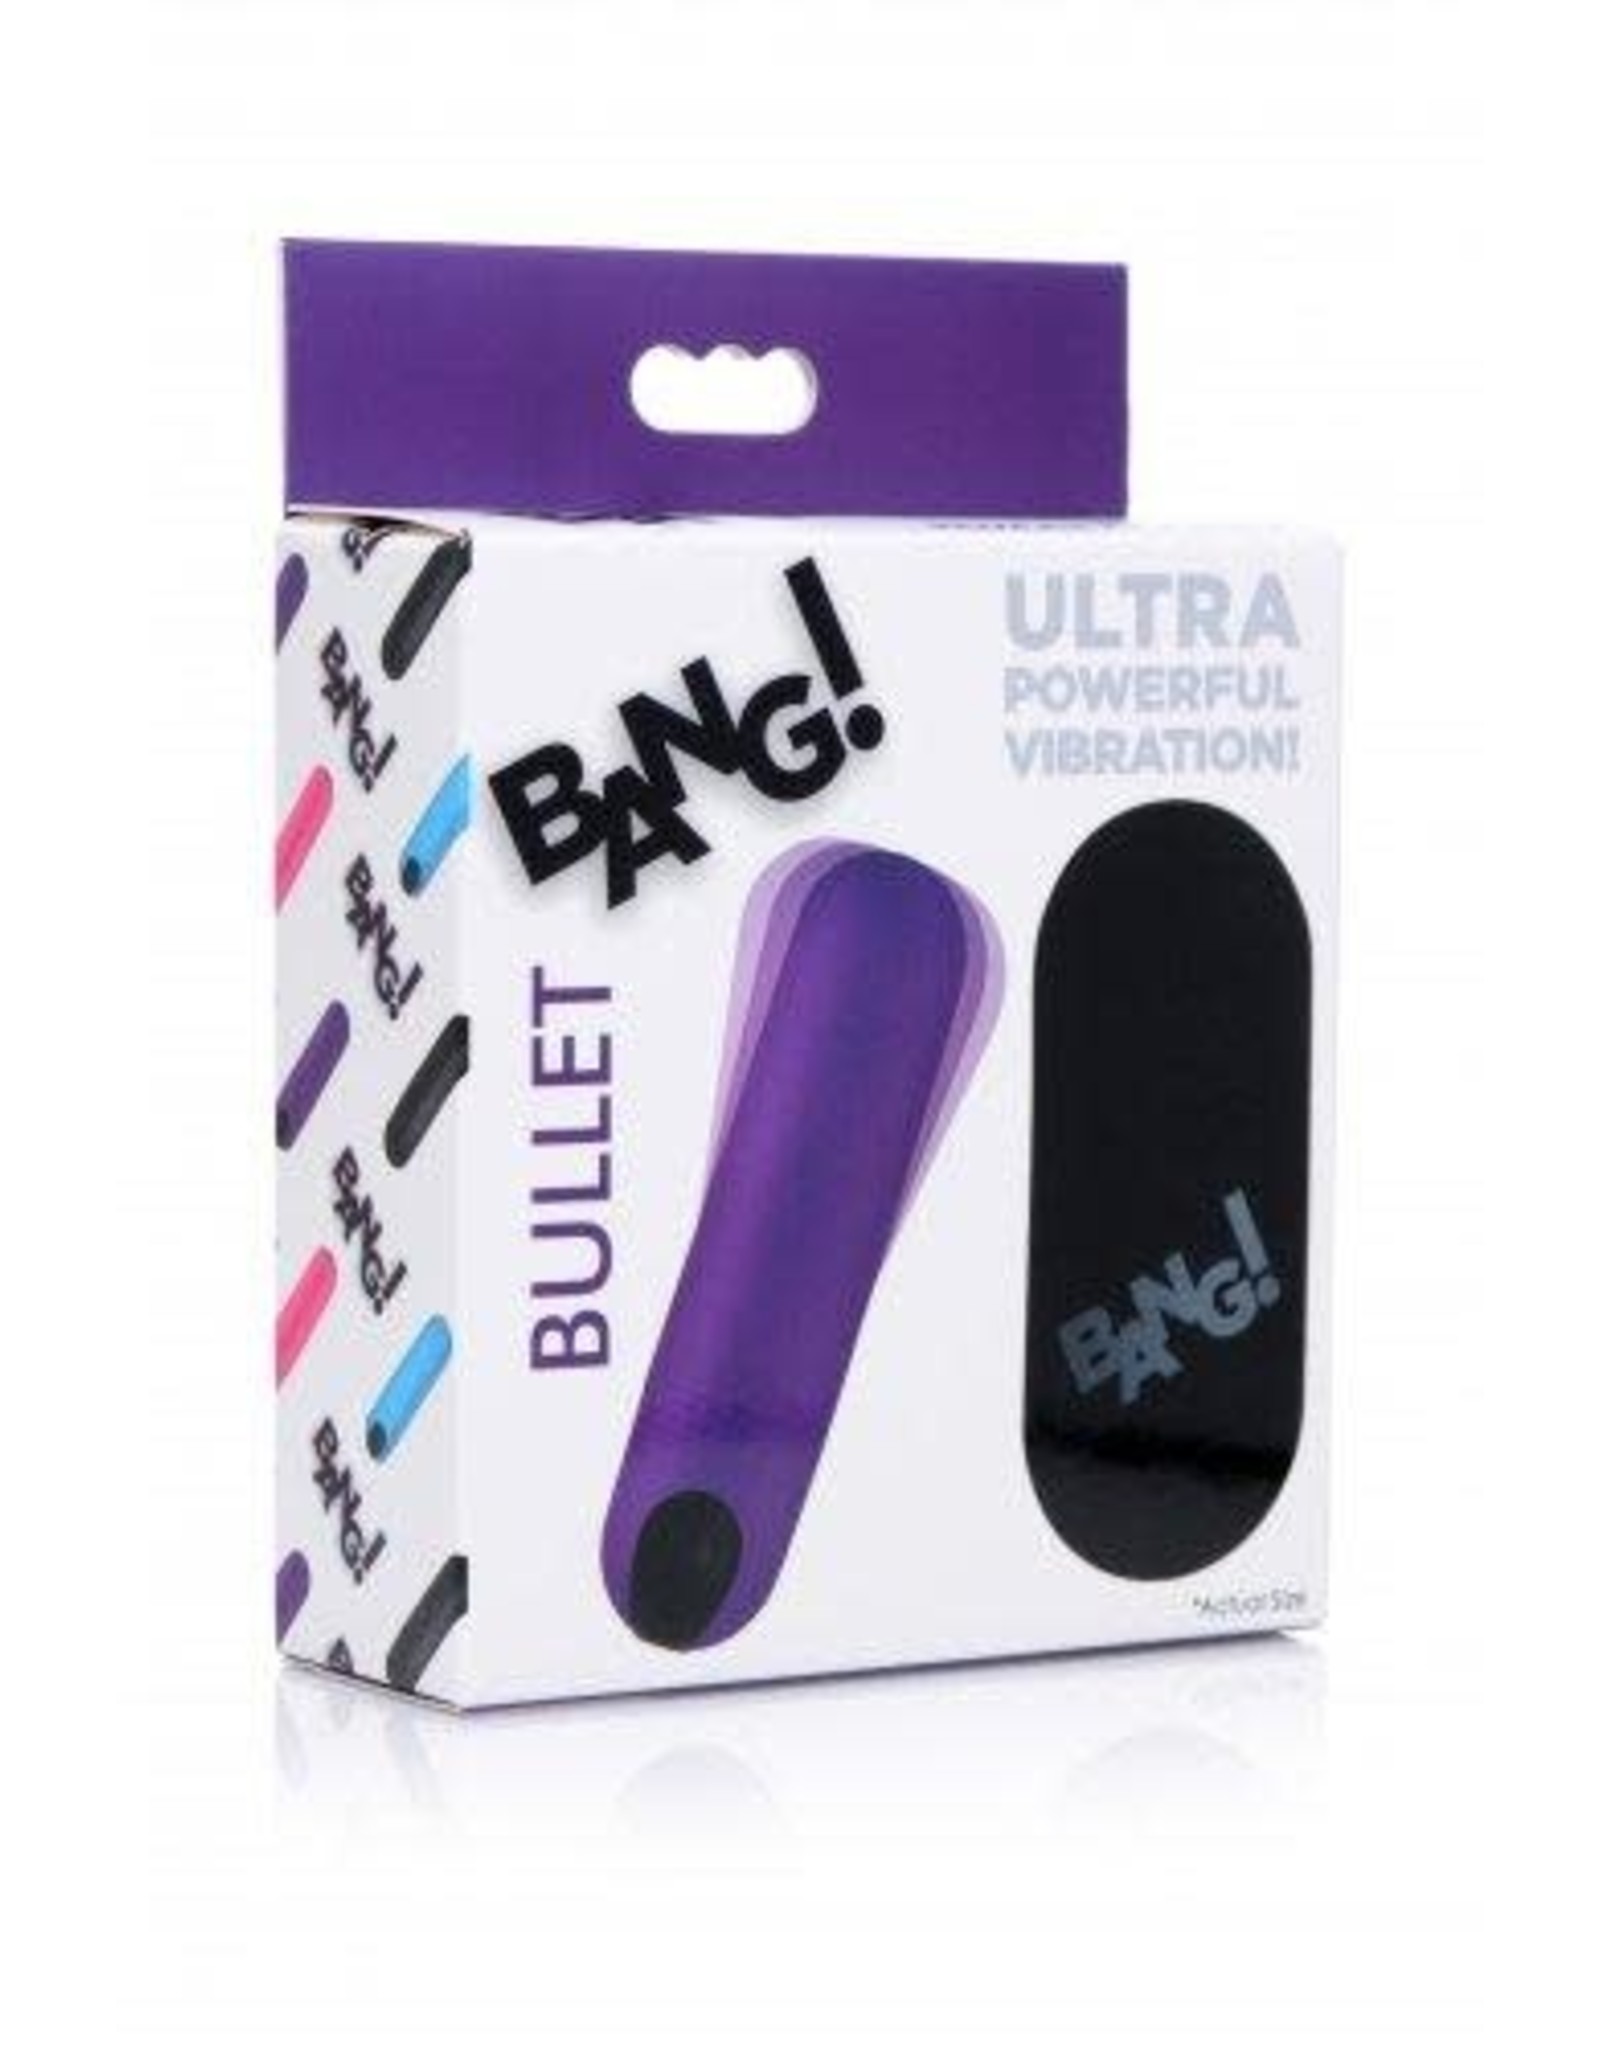 XR Brands Bang! Bullet with Remote - Purple